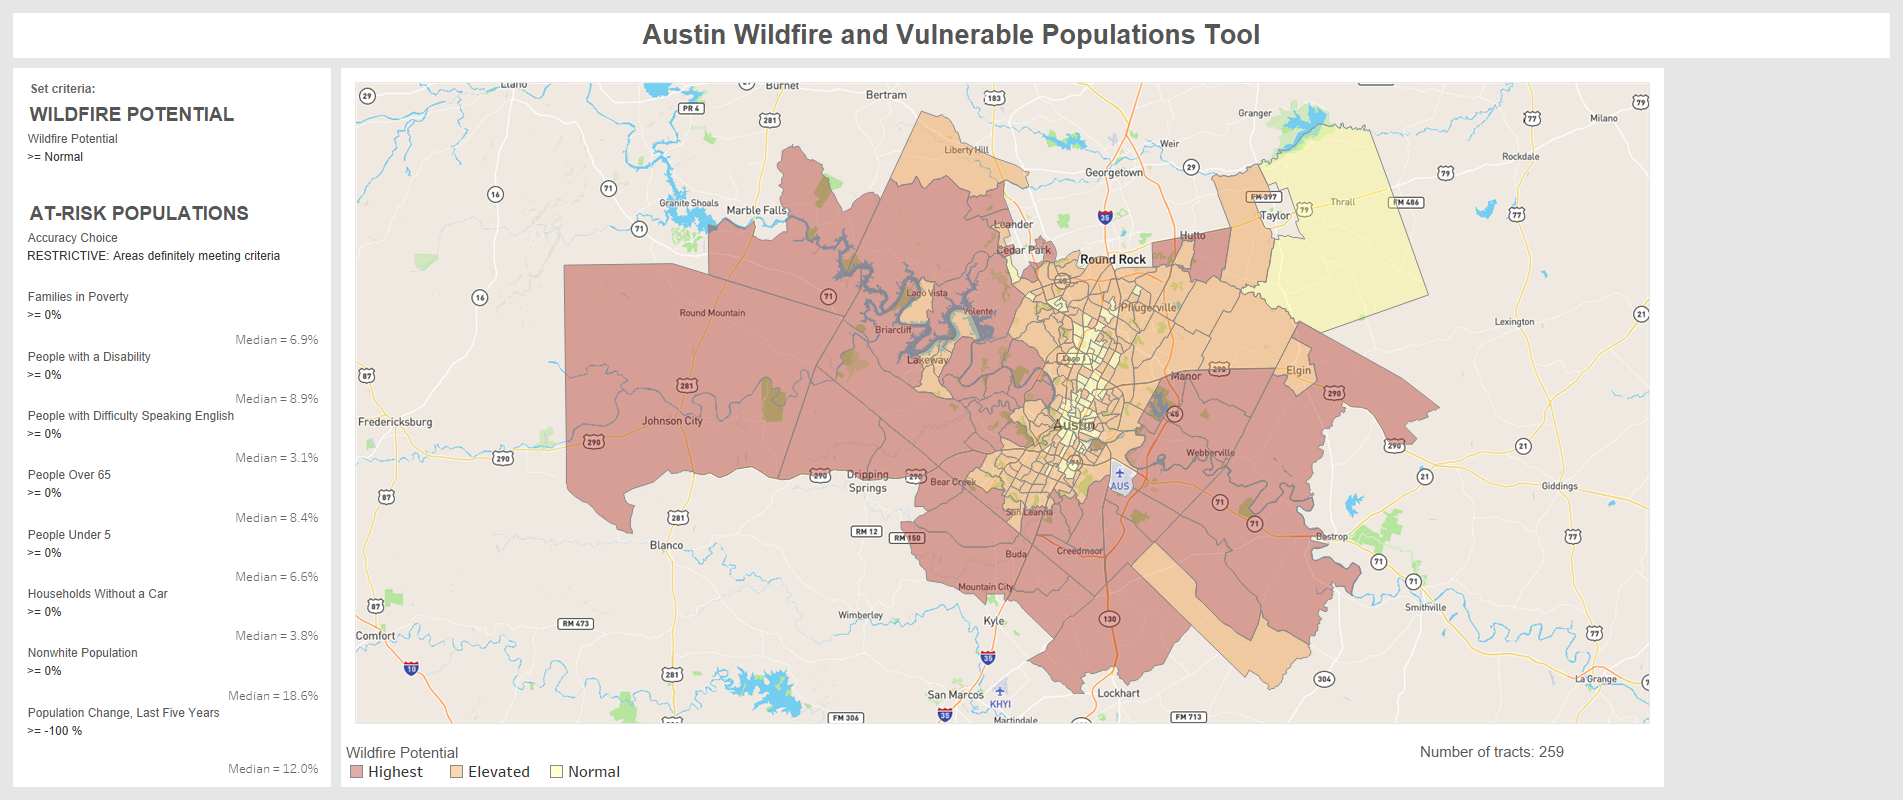 Austin Wildfire and Vulnerable Populations Tool